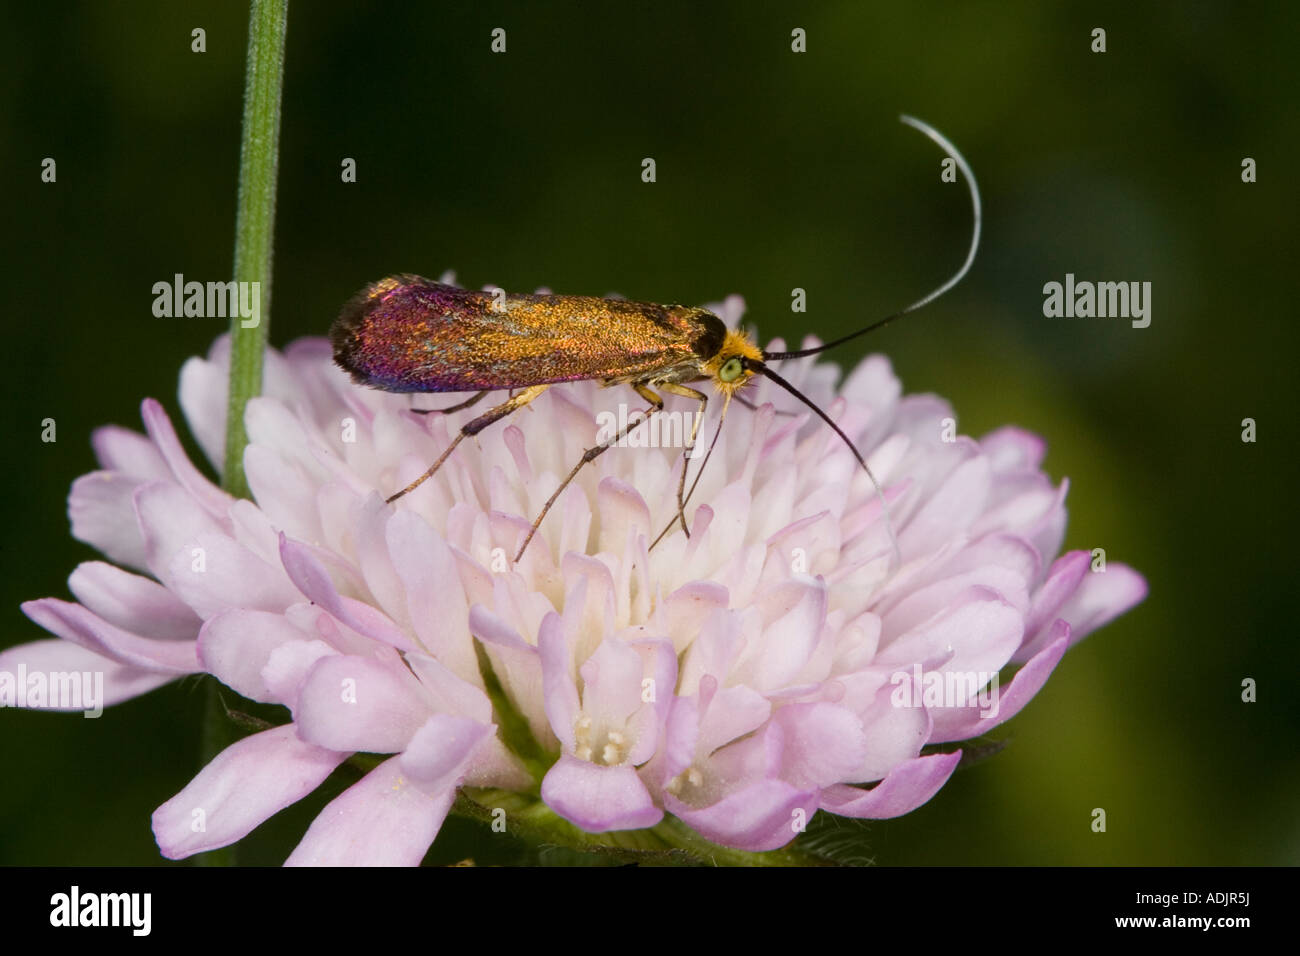 Long-horned micromoth (probably Nemphora cupriacella) on Scabious flower Stock Photo